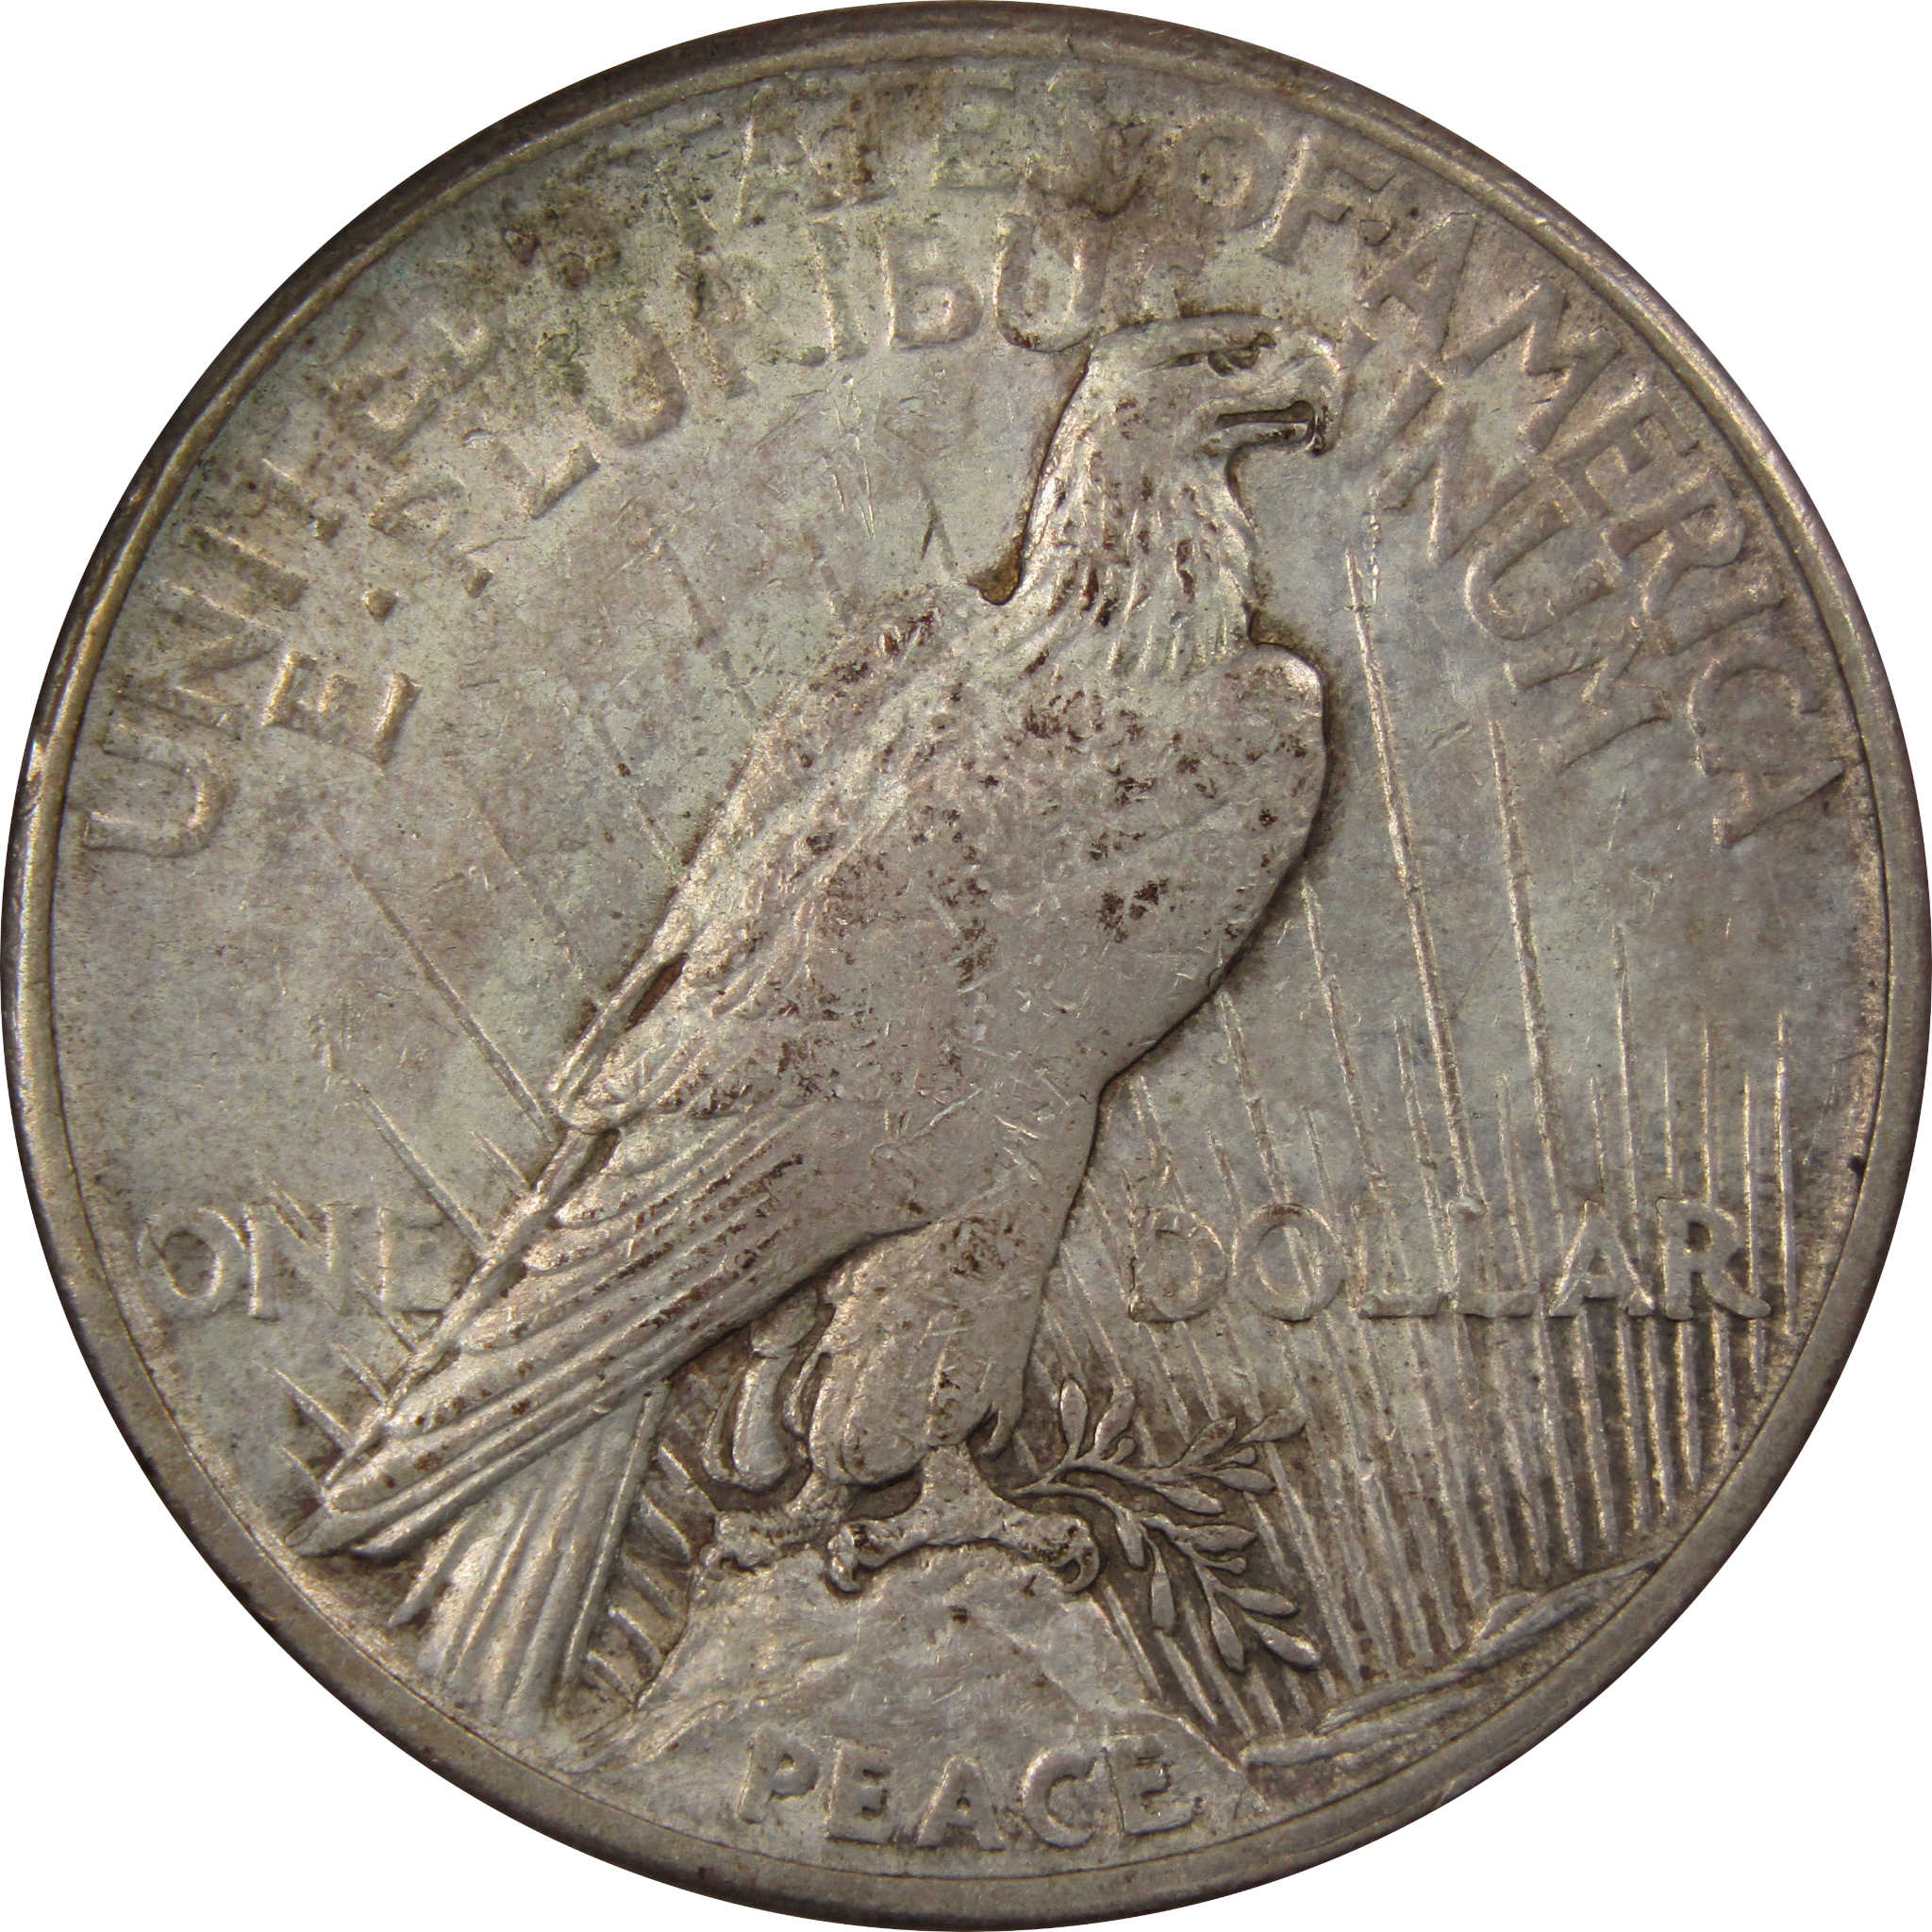 1921 High Relief Peace Dollar VF Very Fine Details Silver $1 SKU:I1146